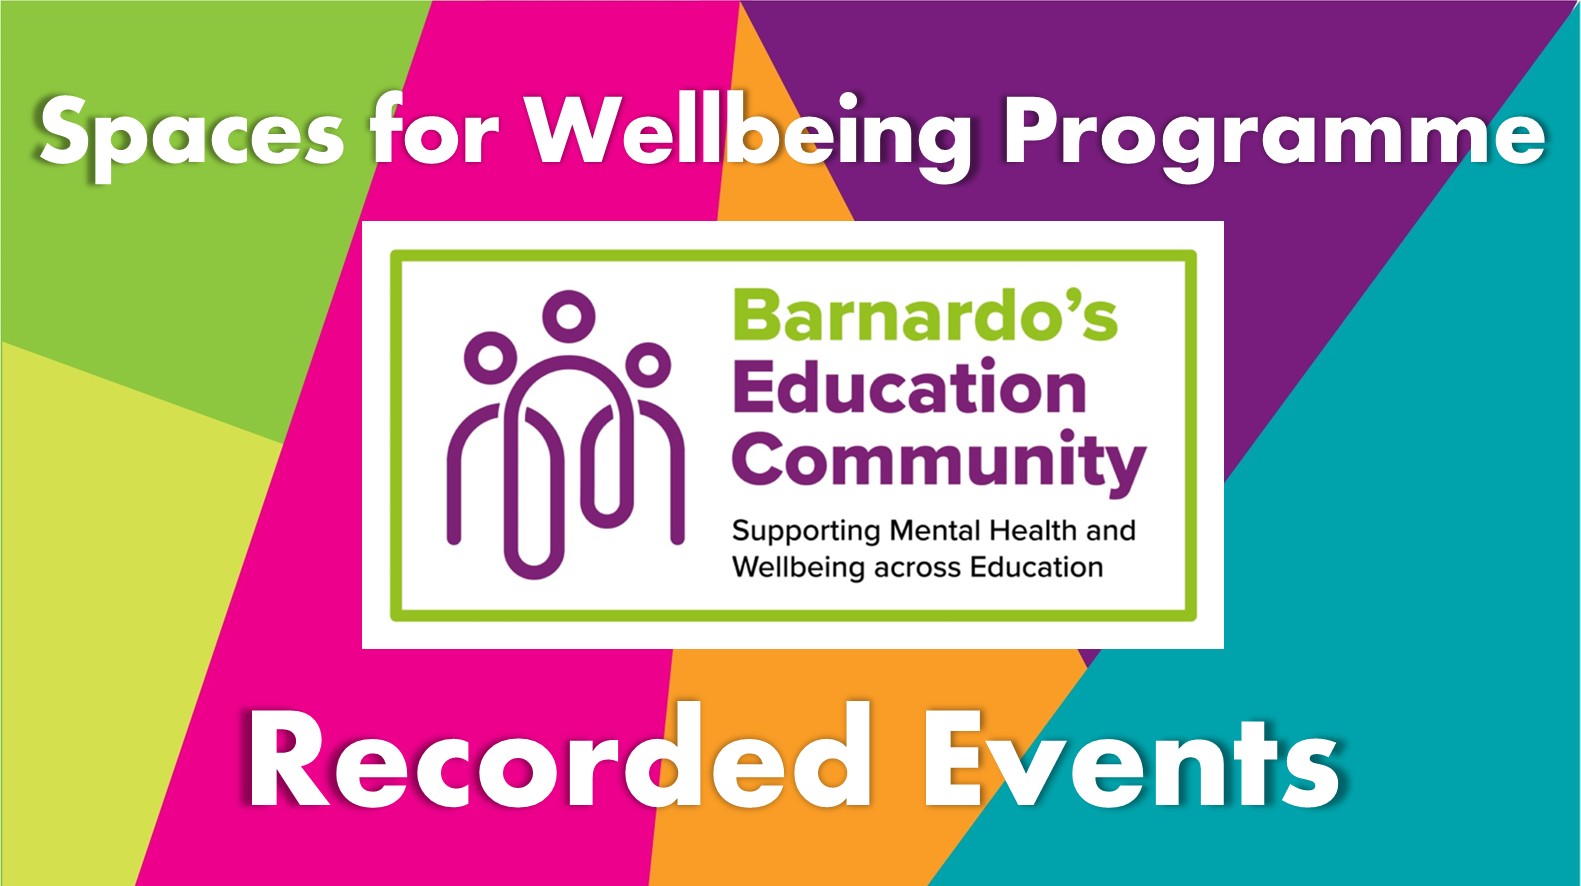 Spaces for Wellbeing Programme - Recorded Events